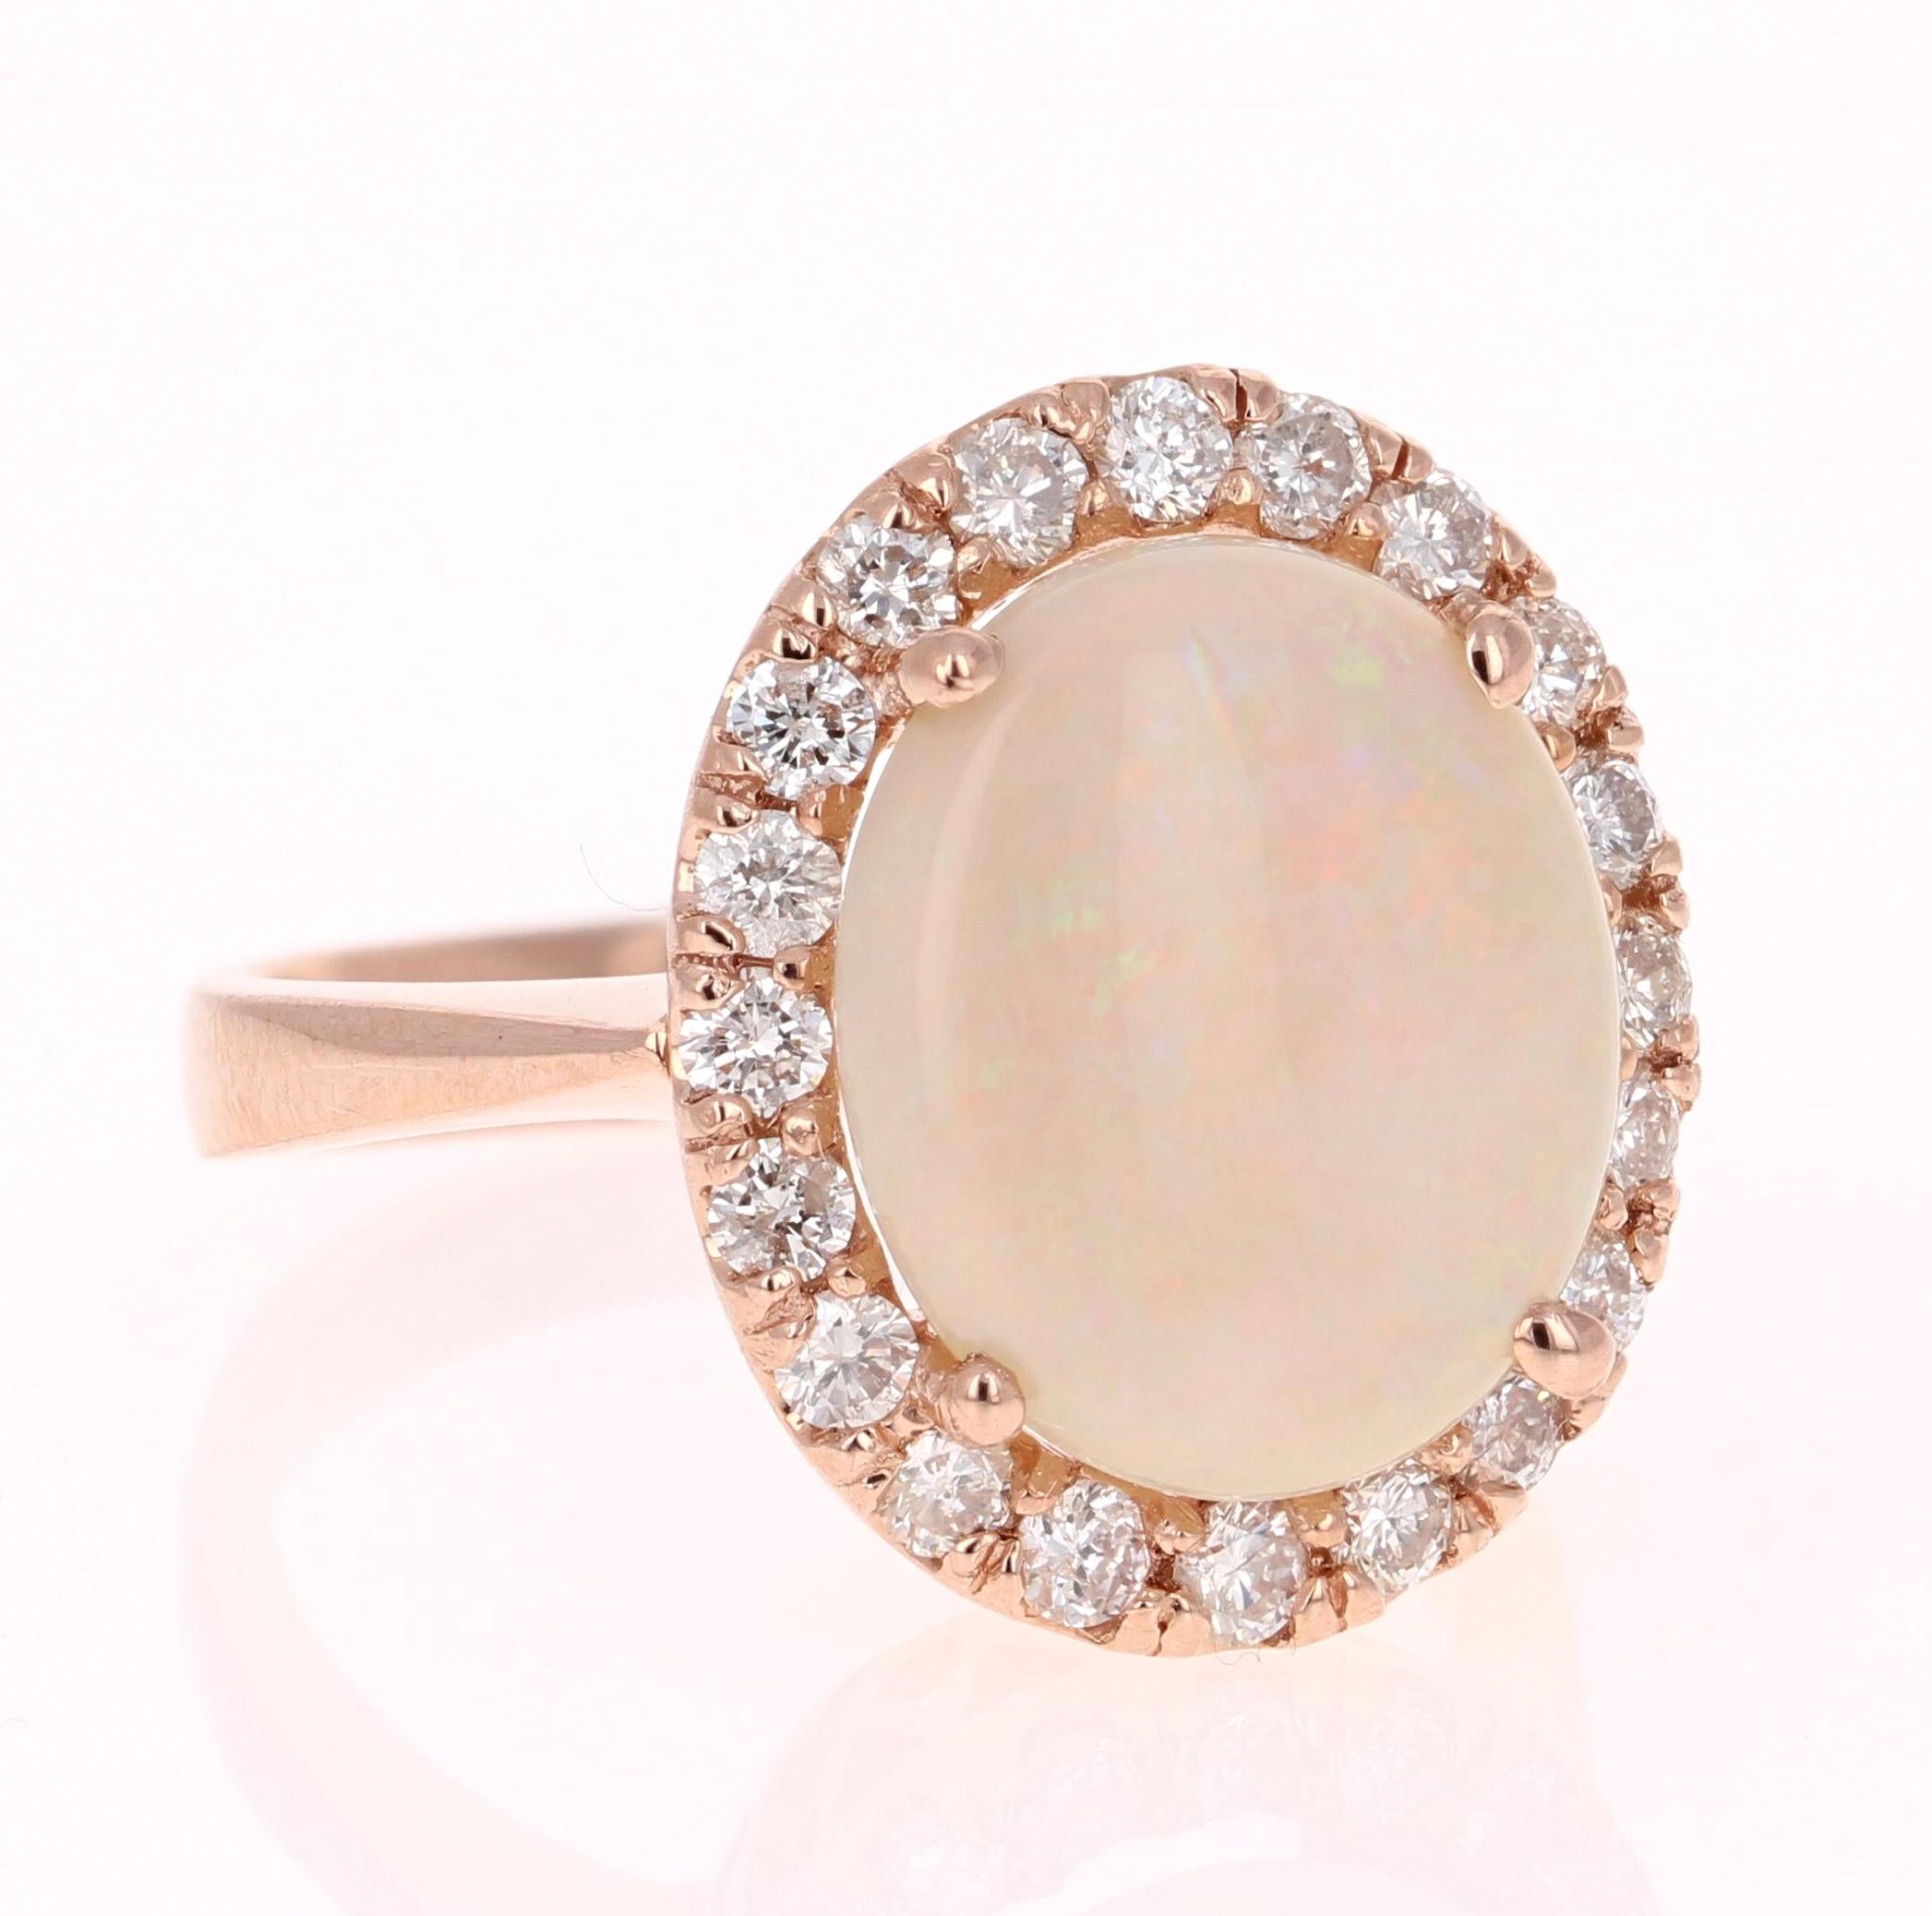 5.00 Carat Oval Cut Opal Diamond Rose Gold Engagement Ring!

Opulent Ethiopian Opal and Diamond Ring made in a 14K Rose Gold setting.  The Oval Cut Opal in this Ring weighs 4.18 carats and is surrounded by 21 Round Cut Diamonds that weigh 0.82 carat